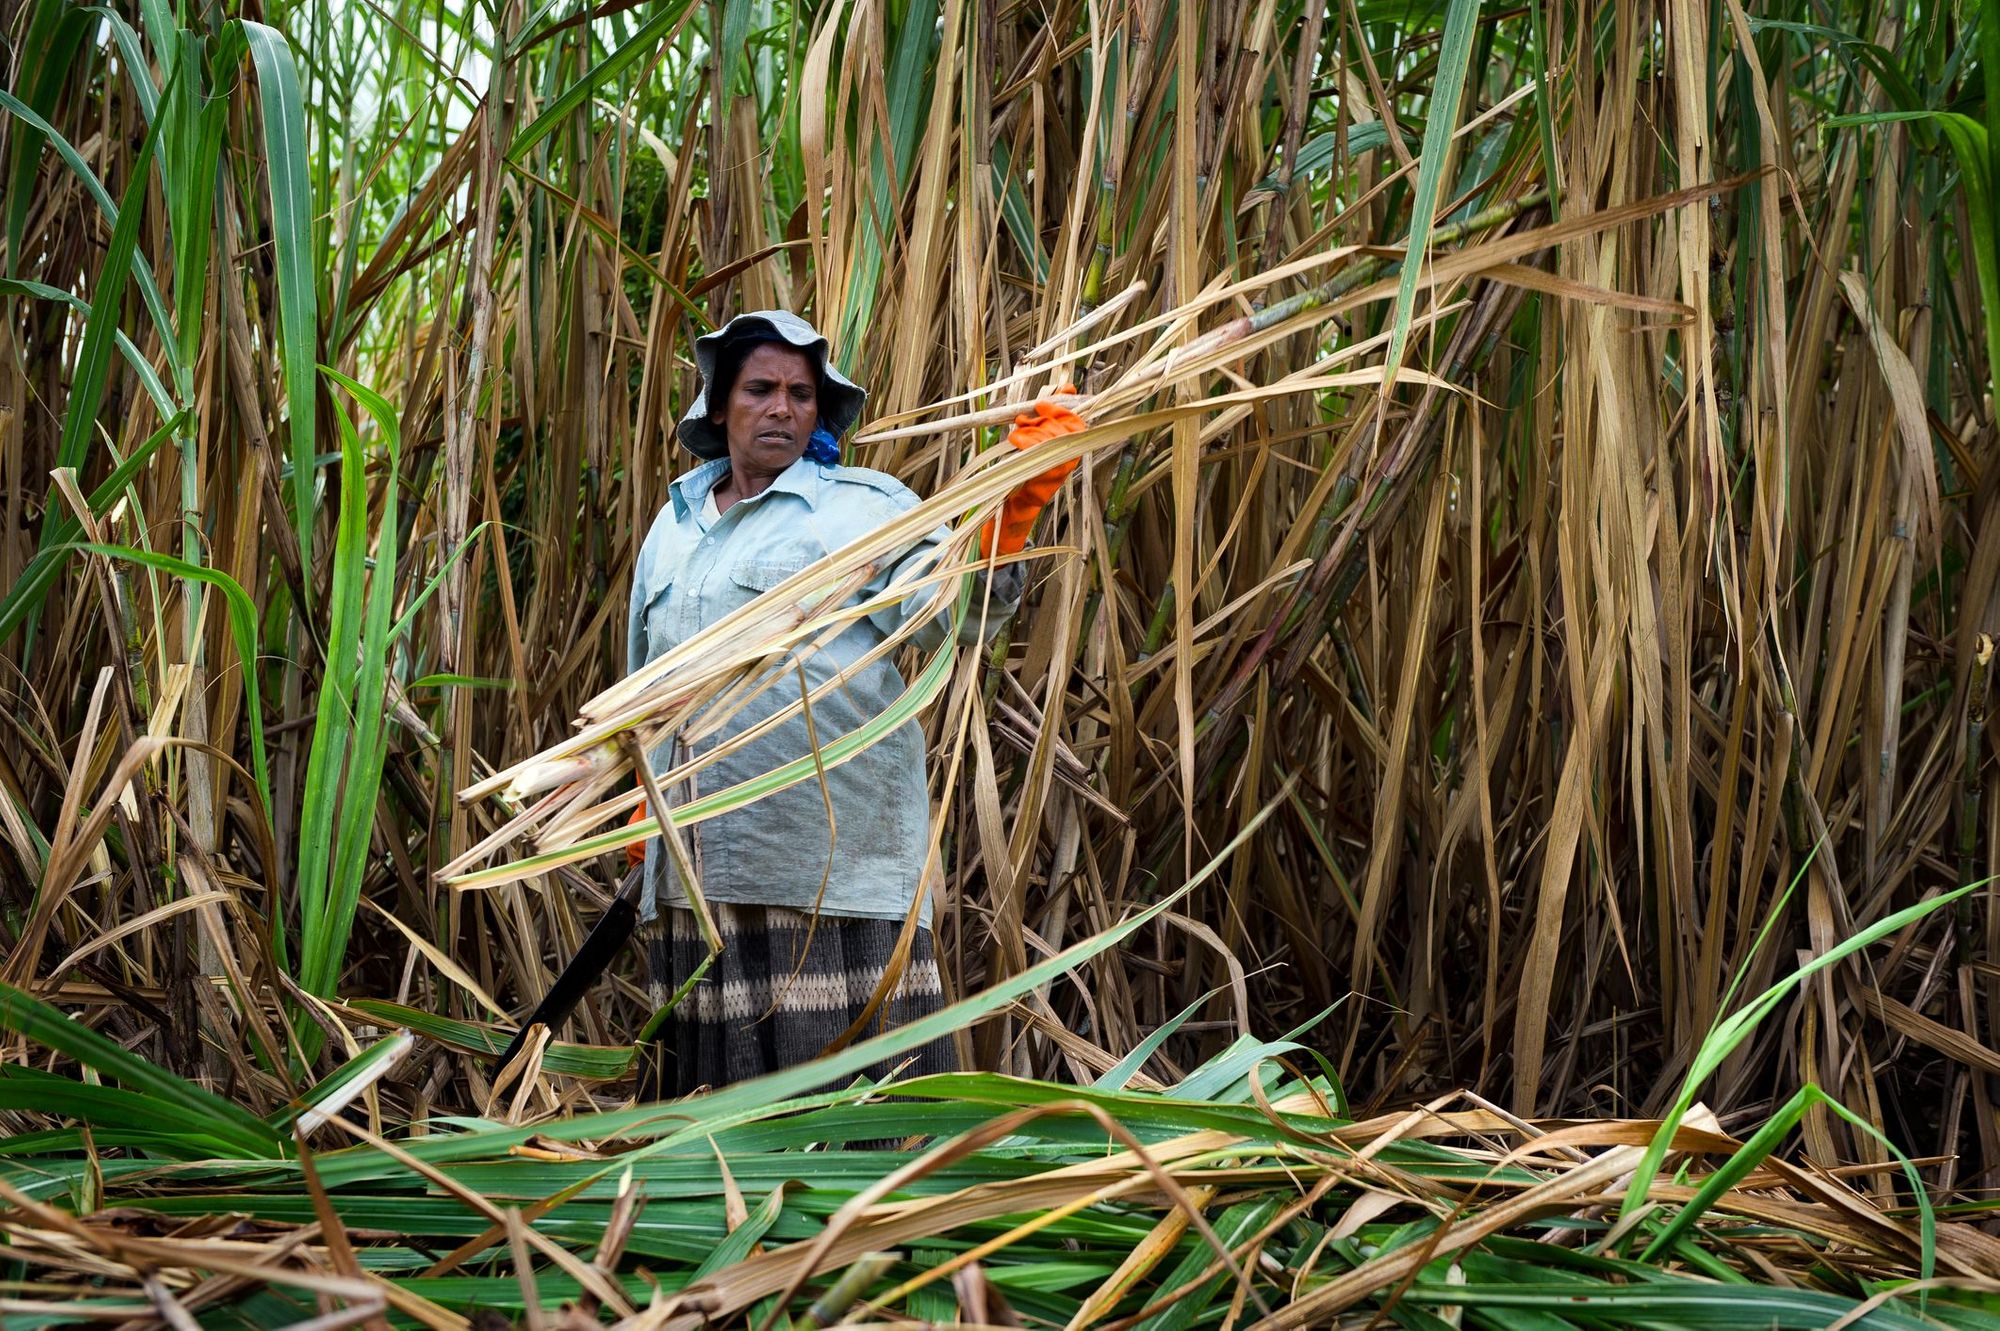 A woman harvesting sugarcane in Mauritius